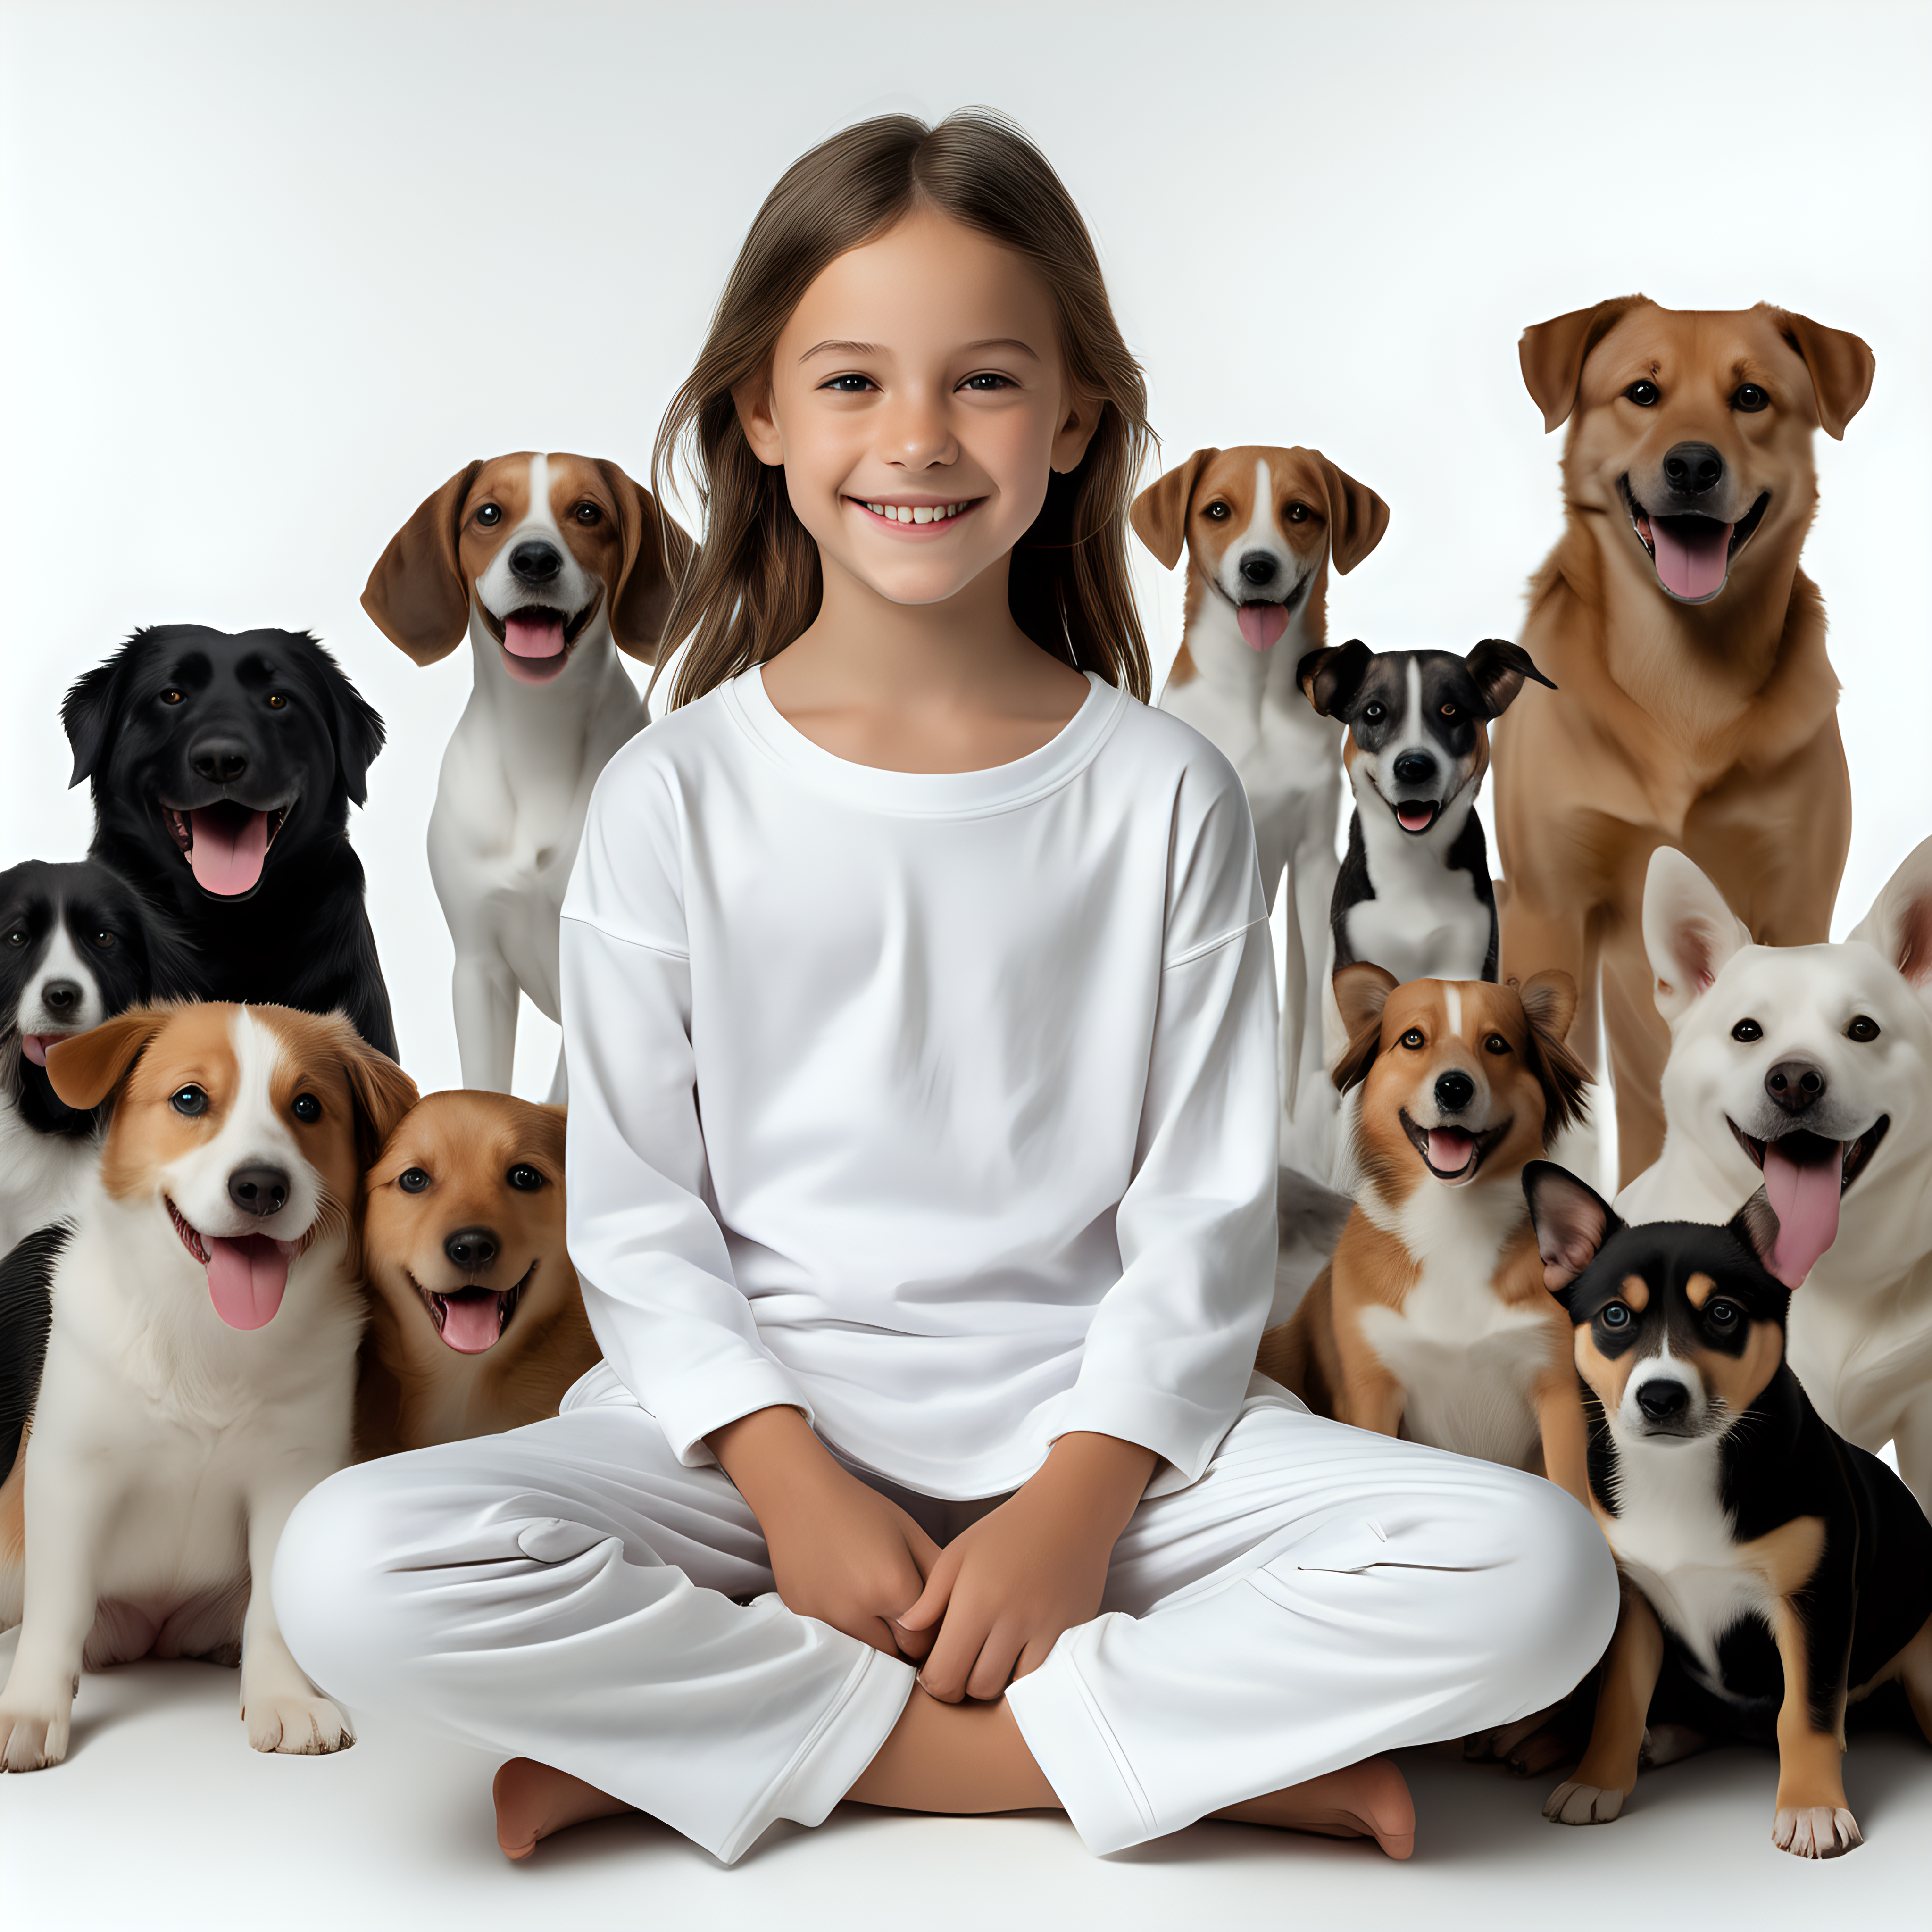 “Perfect Facial Features photo of a smiling 10 year old girl sitting  in  white cotton tshirt pyjama with no print, long  tight cuff sleeves, loose long pants) ,surrounded by many different dogs, no background, hyper realistic, ideal face template, HD, happy, Fujifilm X-T3, 1/1250sec at f/2.8, ISO 160, 84mm”